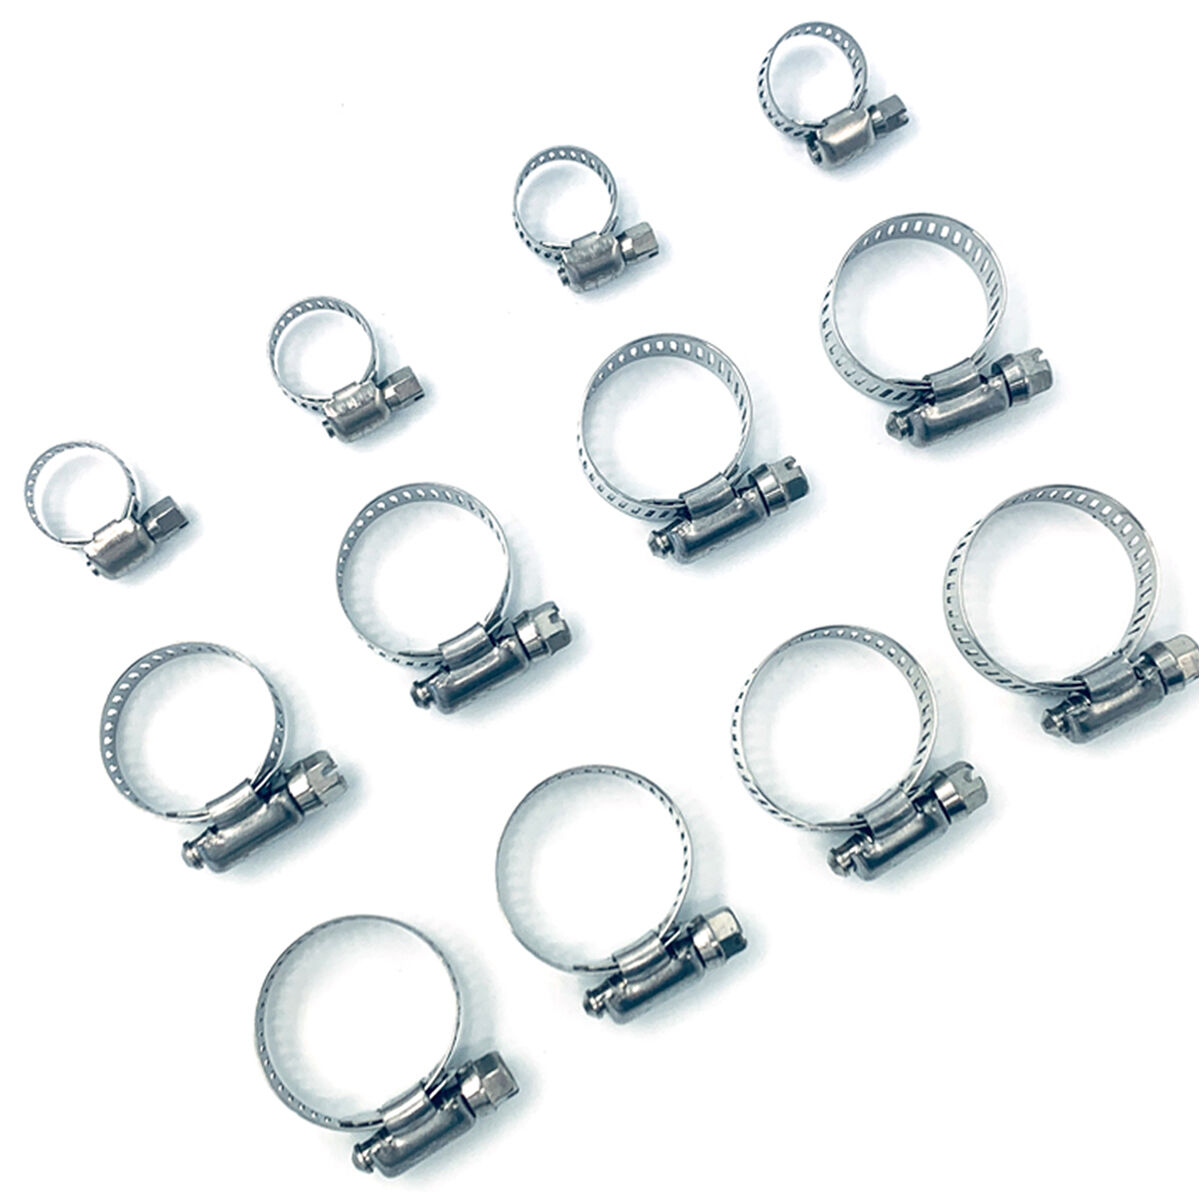 SCA Hose Clamps - Stainless, 13-16mm, 16-27mm & 18-32mm, , scaau_hi-res